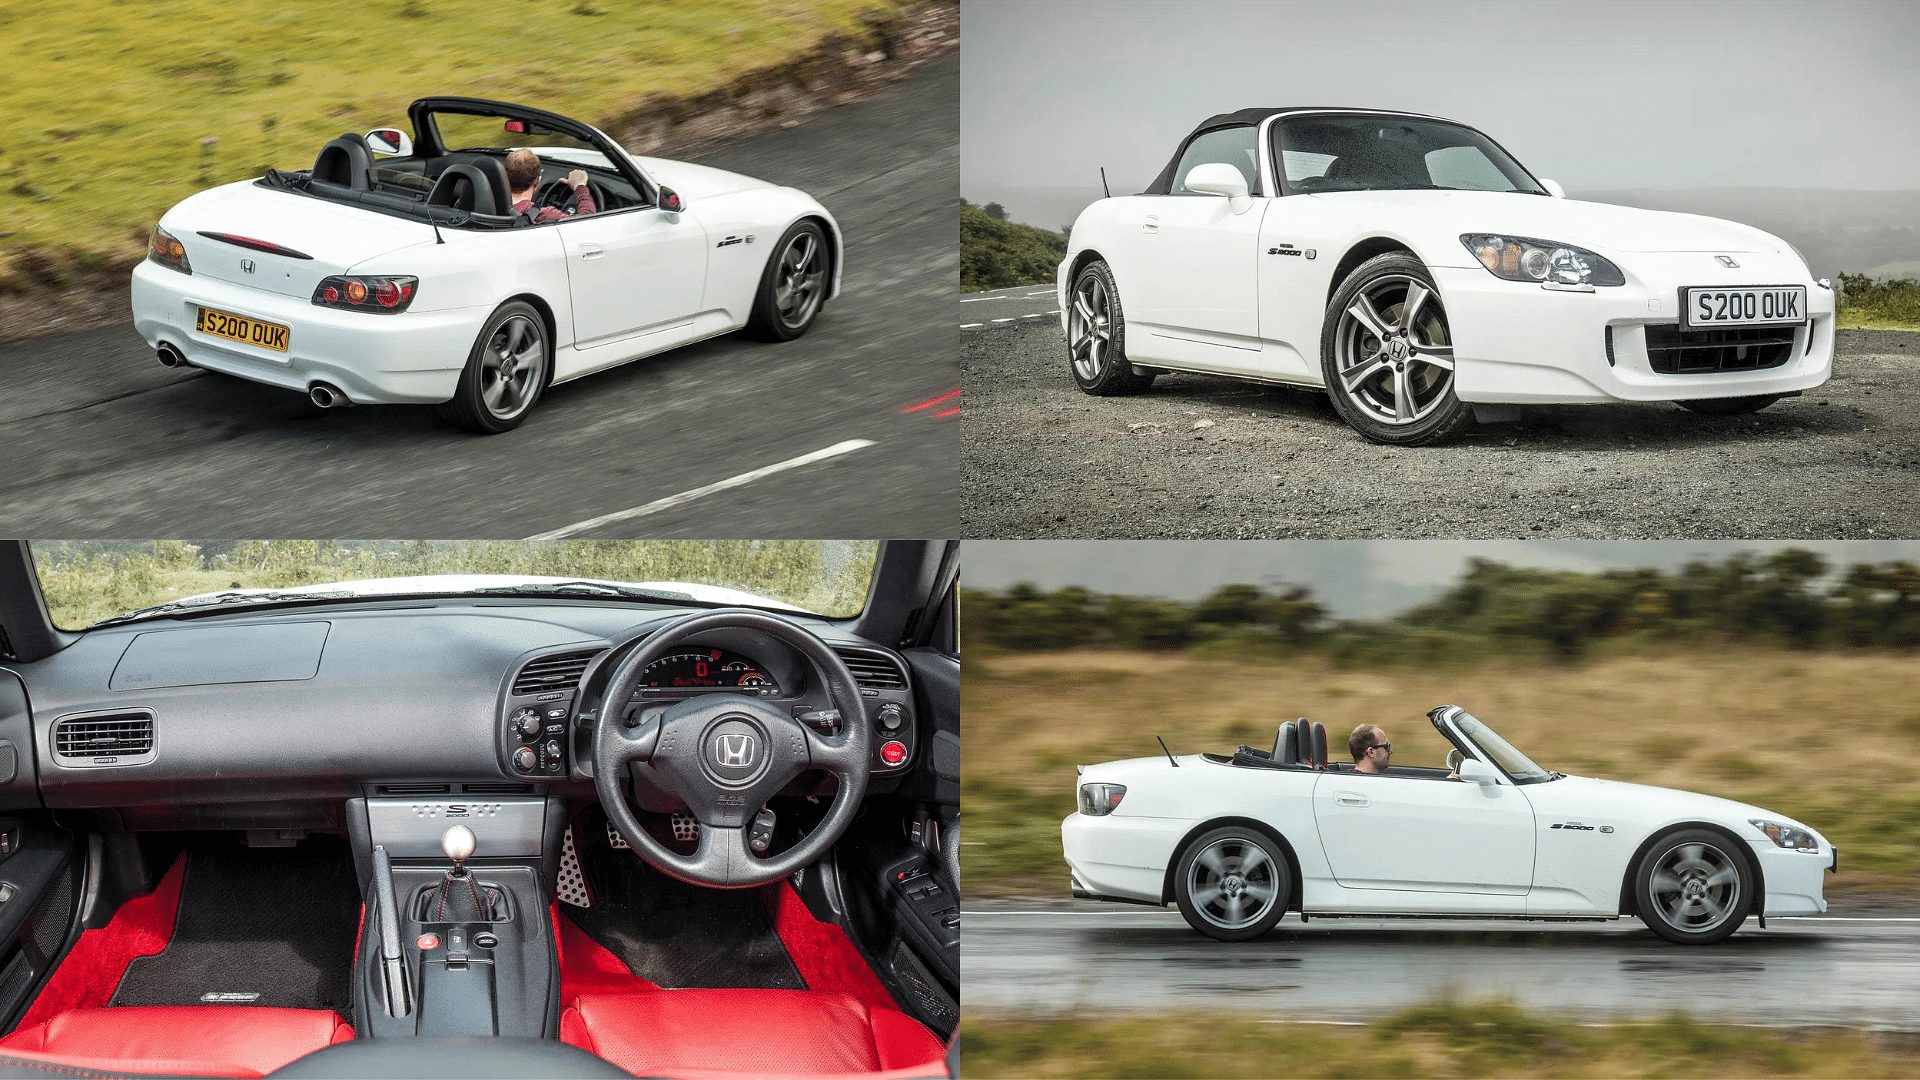 Honda S2000 Convertible in White exterior color - front view, rear view, side view, dashboard, interior